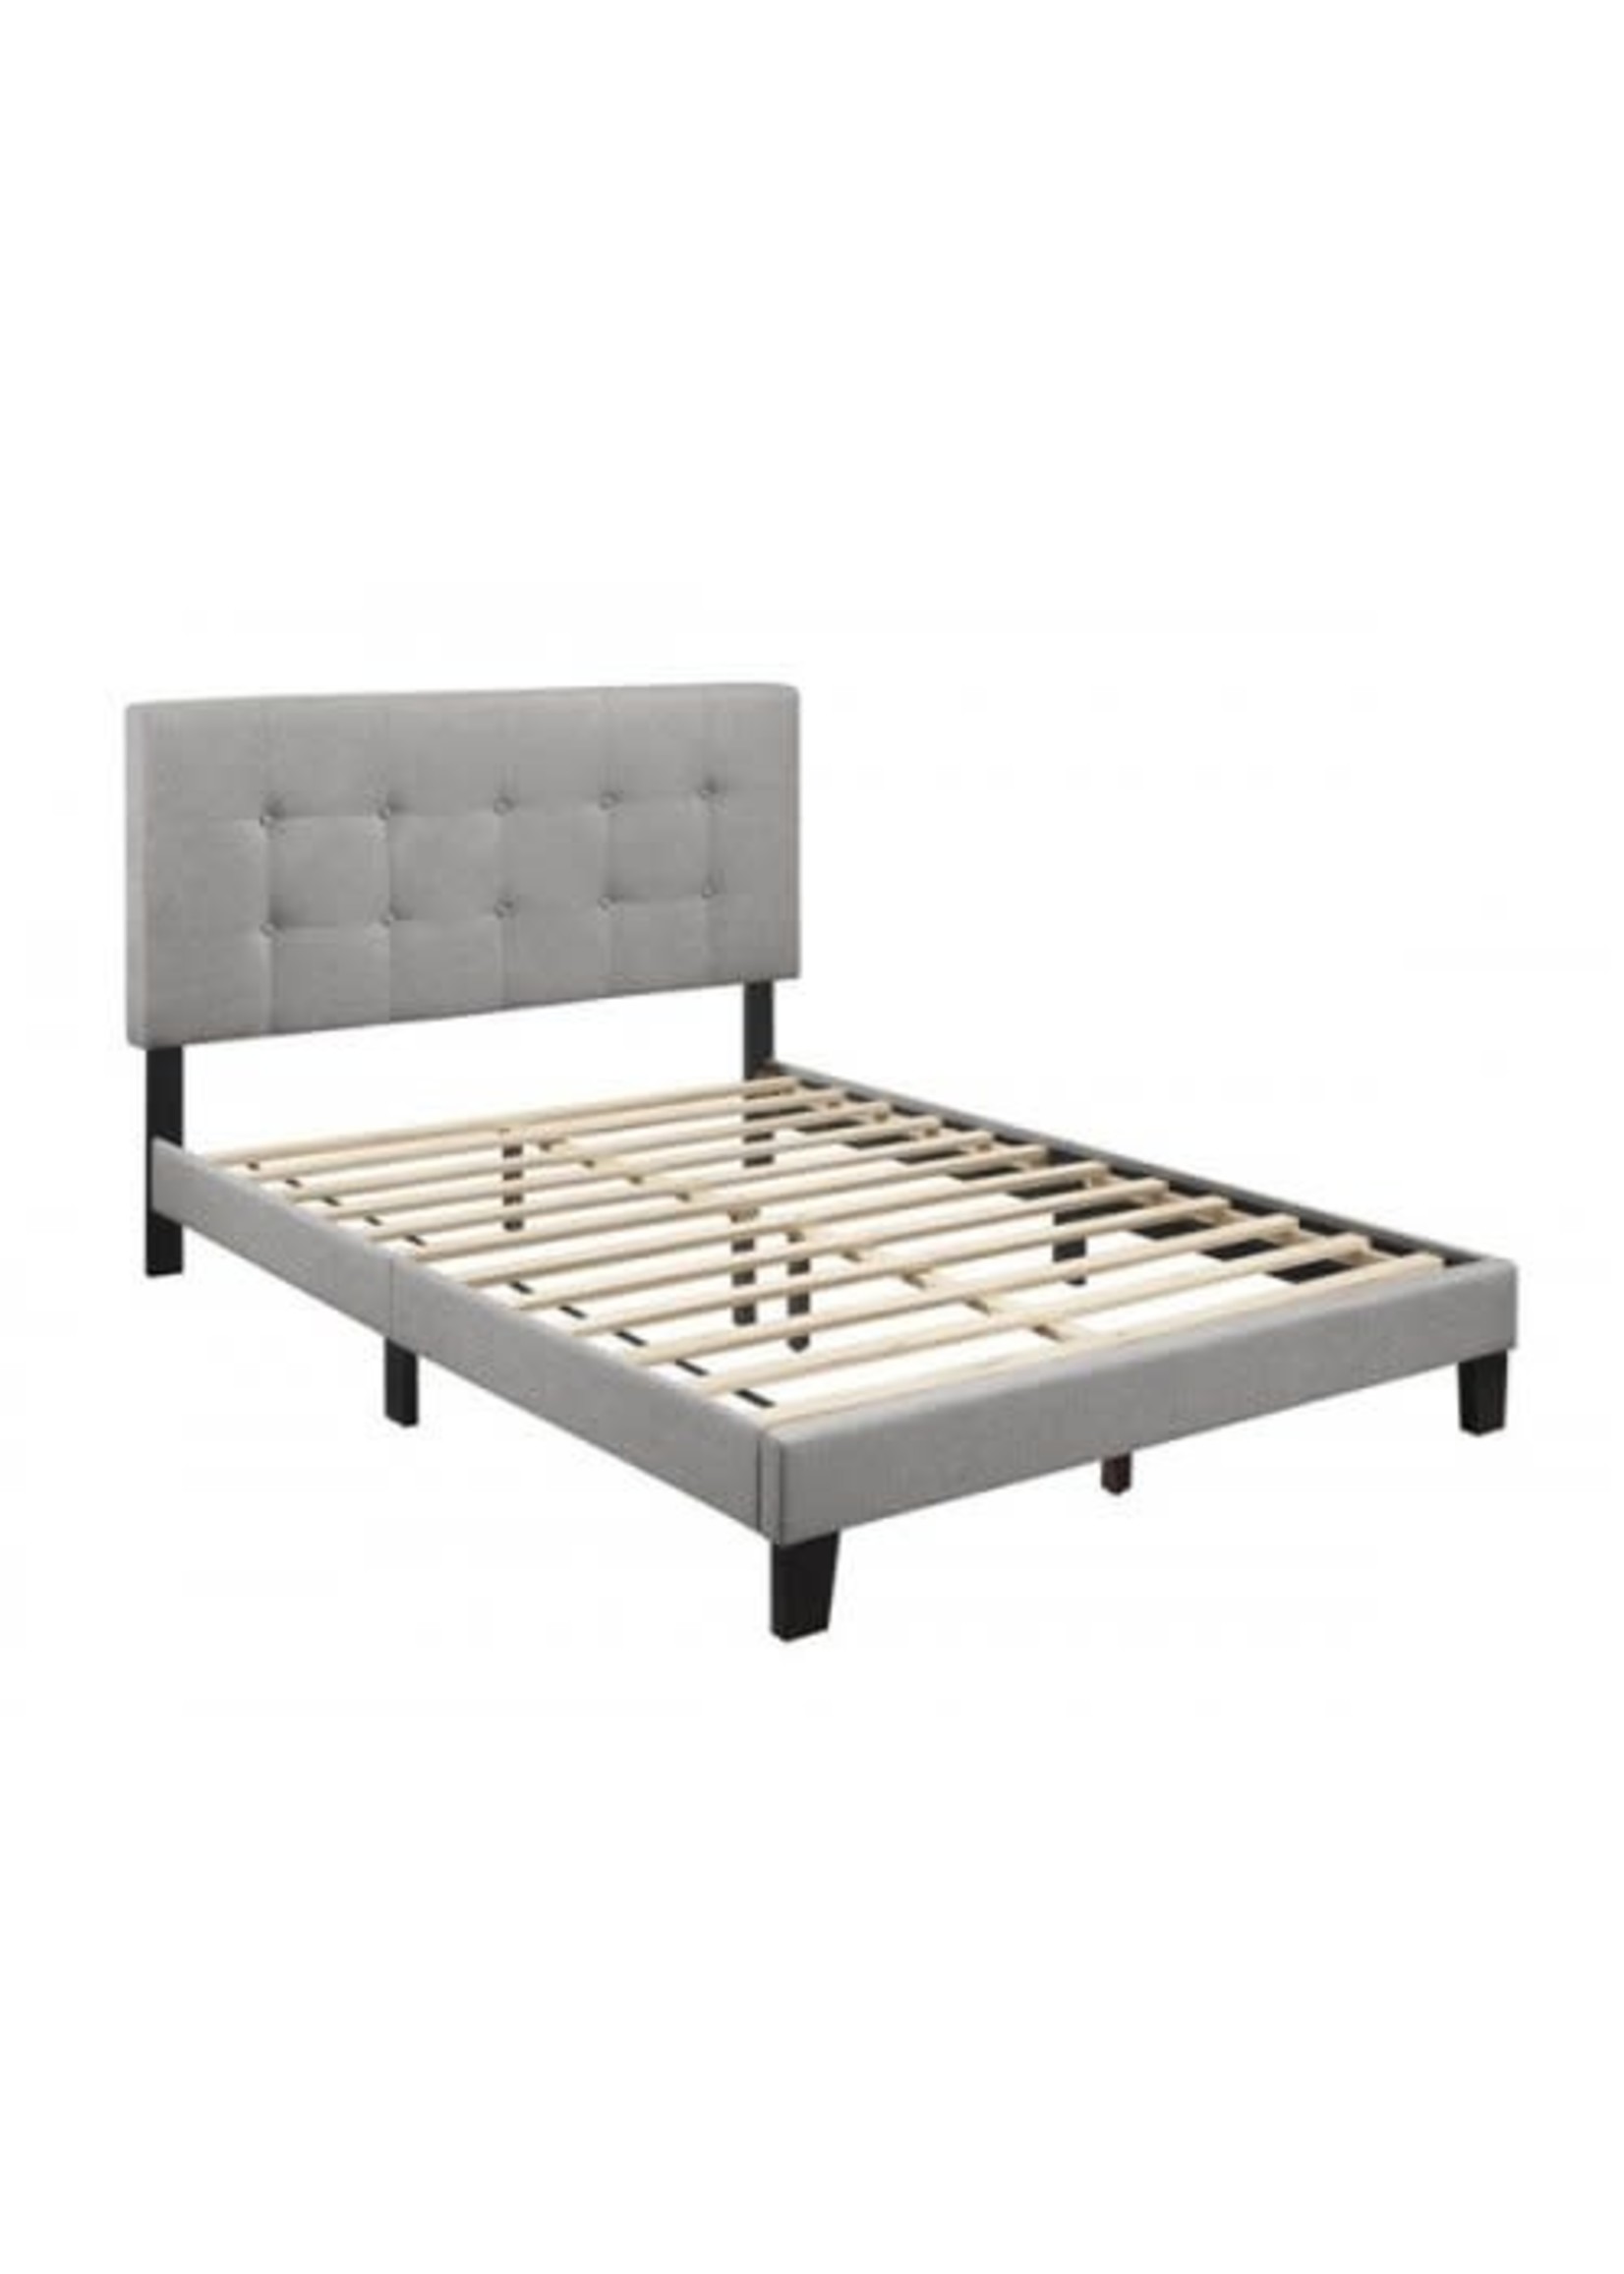 CROWNMARK 5283GY-F BED FULL SIZE RIGBY GREY